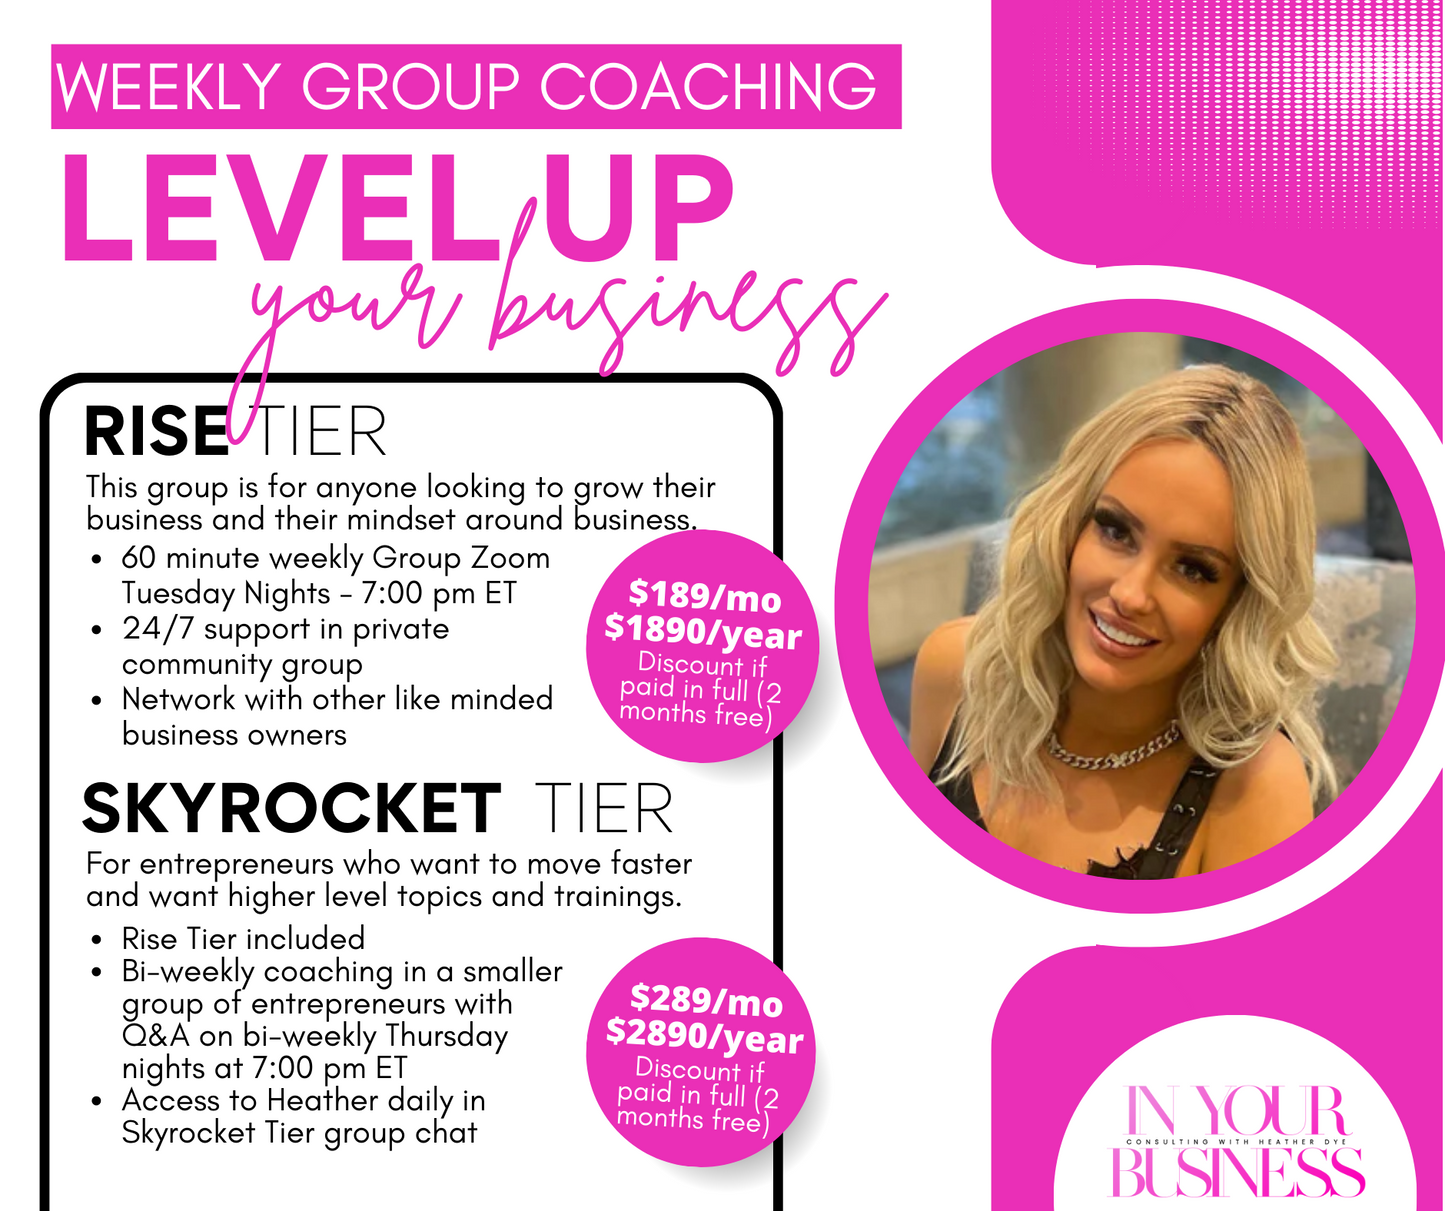 Level Up Your Business Weekly Coaching